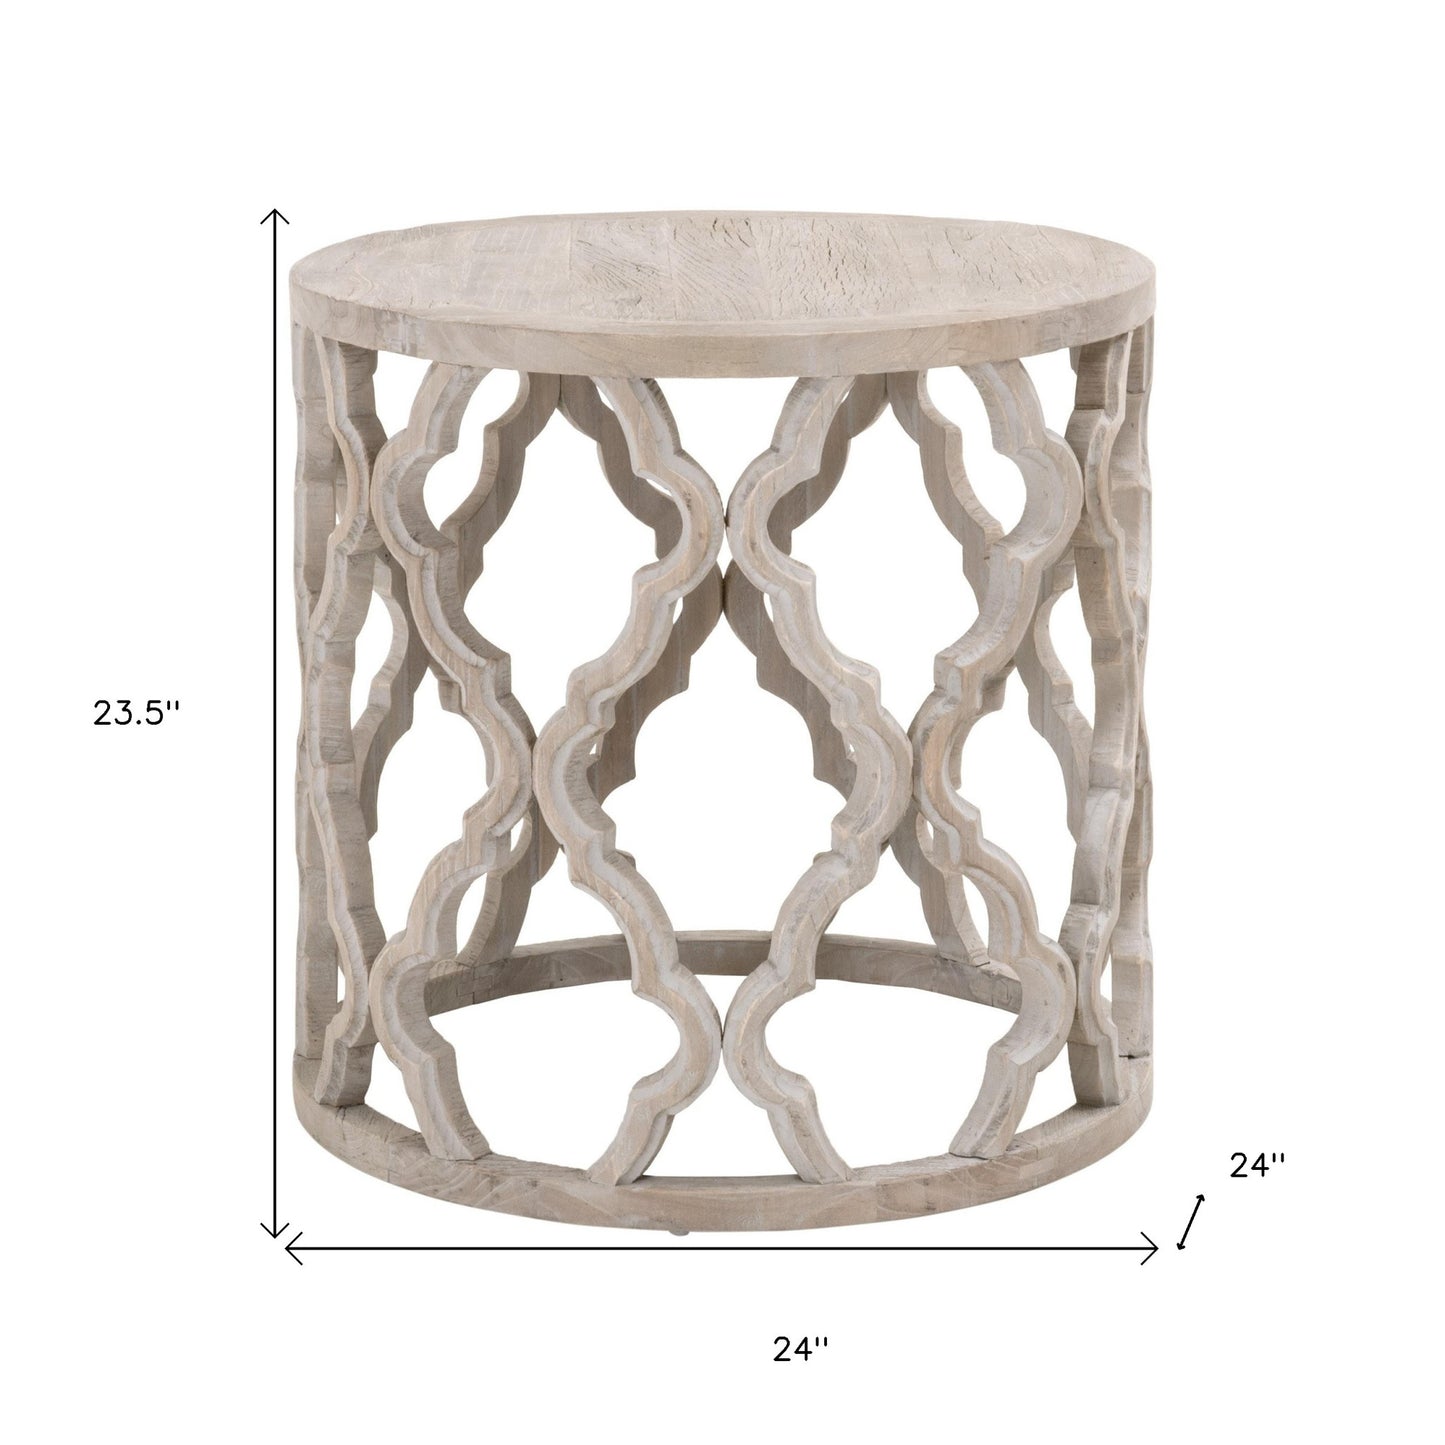 24" Smoke Gray Solid Wood Quatrefoil Round End Table